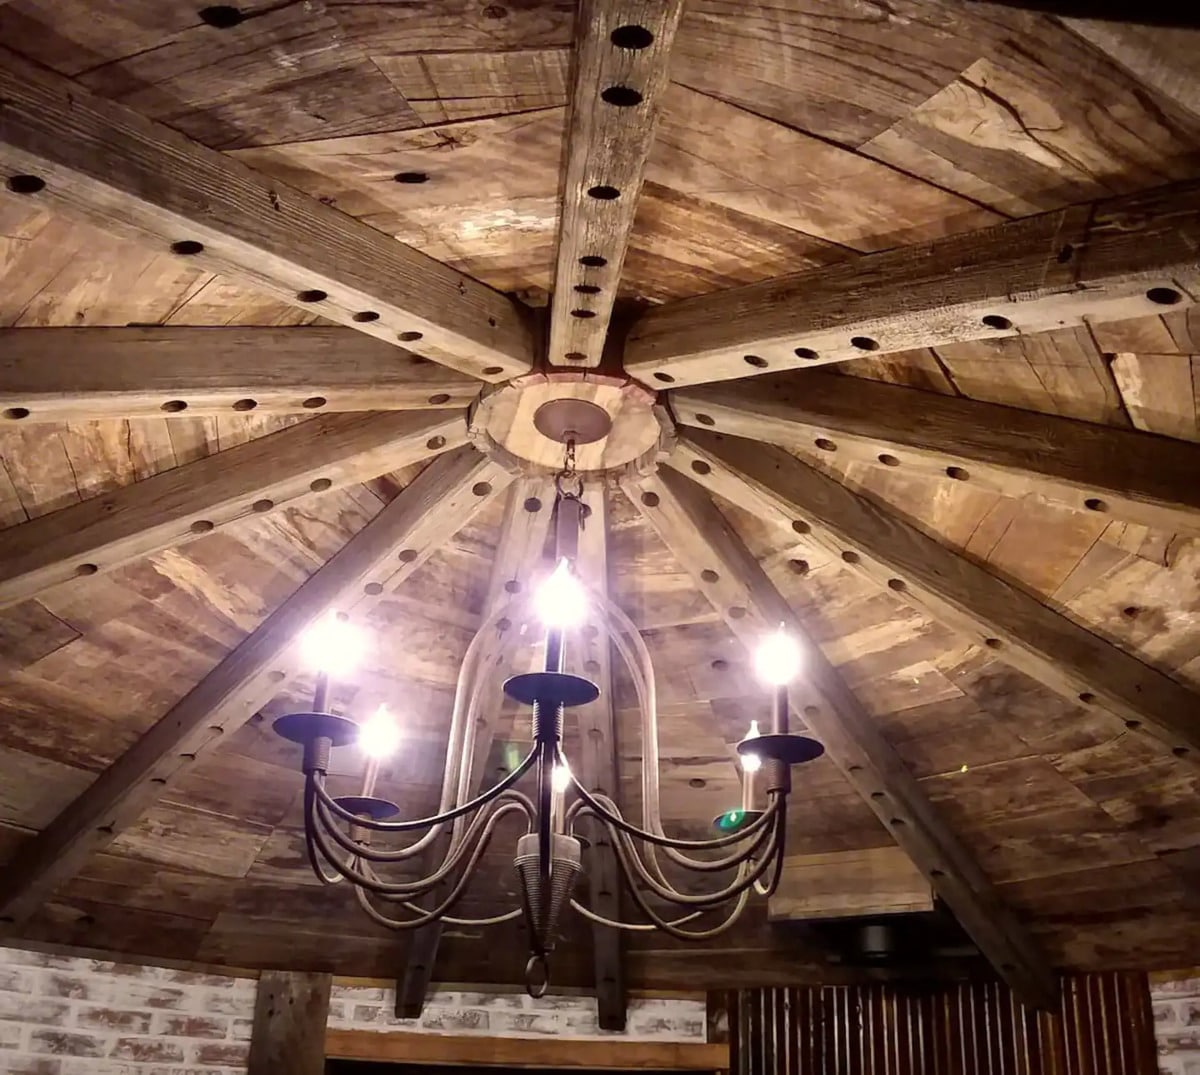 Reclaimed wood slats and timbers on ceiling with rustic chandelier in center